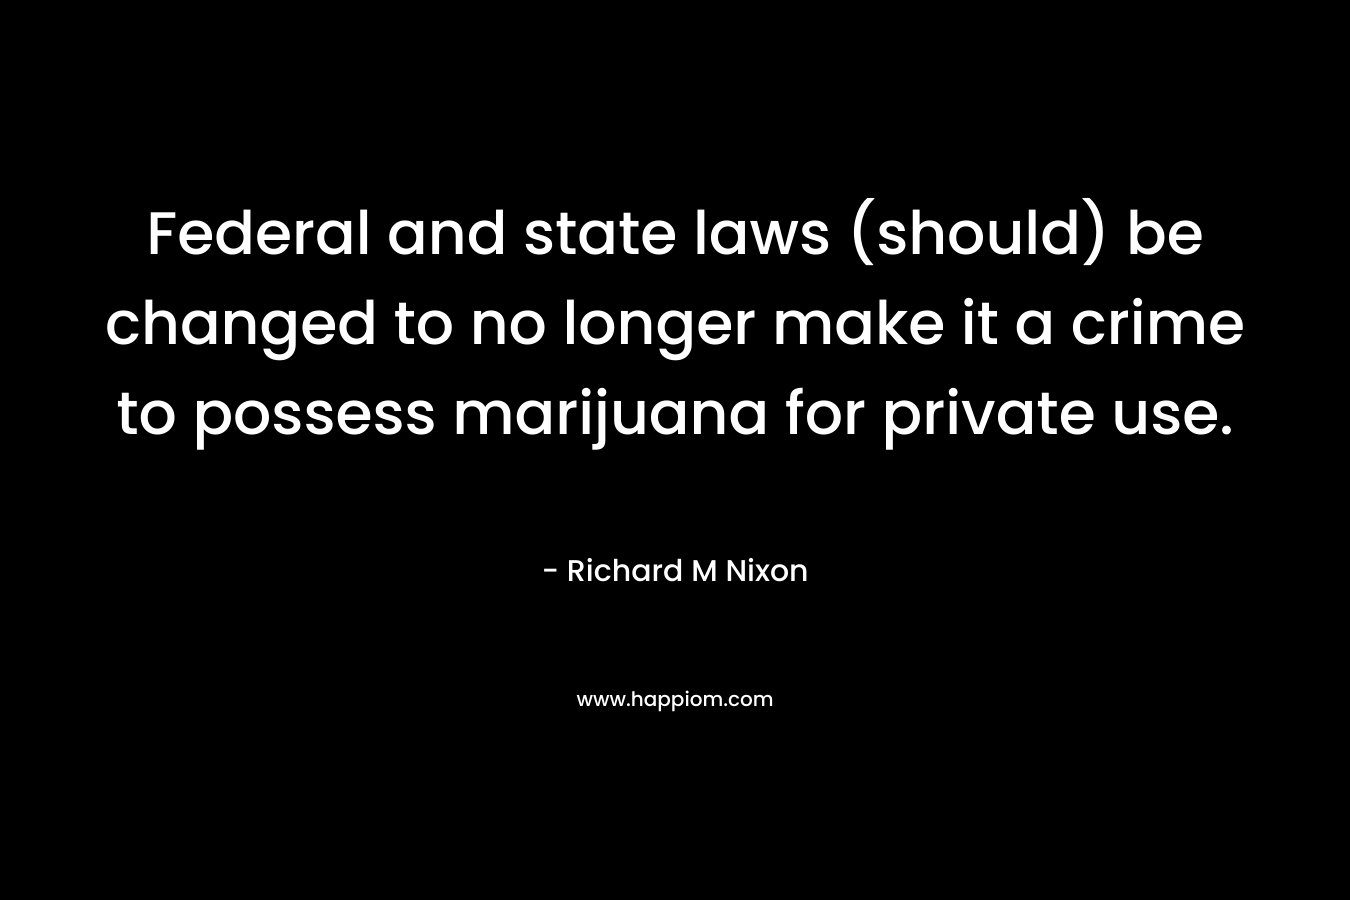 Federal and state laws (should) be changed to no longer make it a crime to possess marijuana for private use. – Richard M Nixon